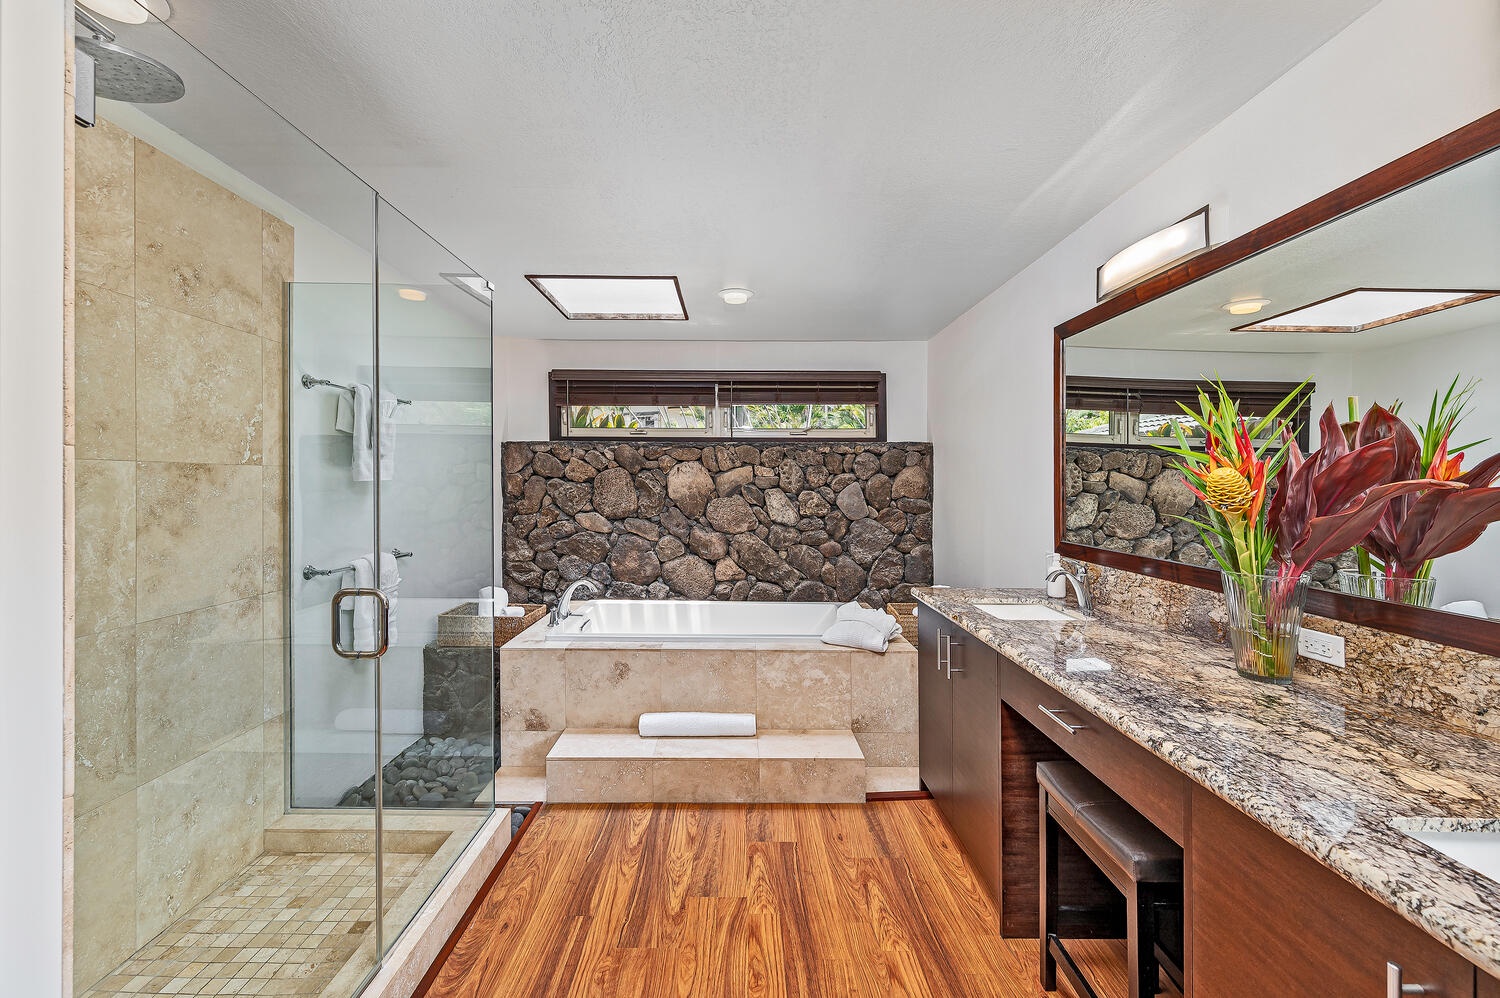 Honolulu Vacation Rentals, Nani Wai - Primary suite evoking spa-like serenity for your relaxation.